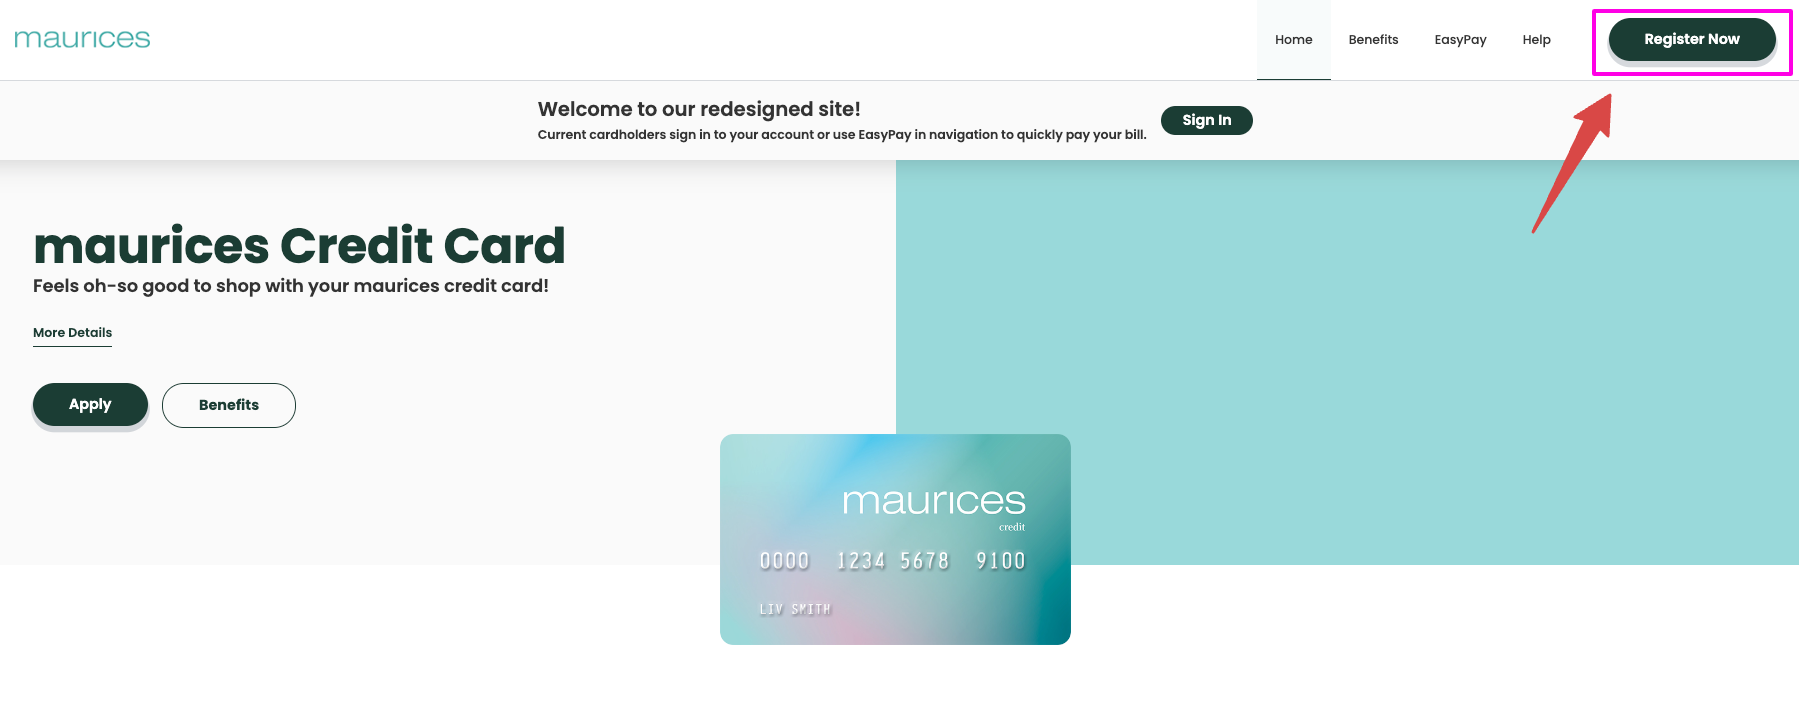 maurices card register page